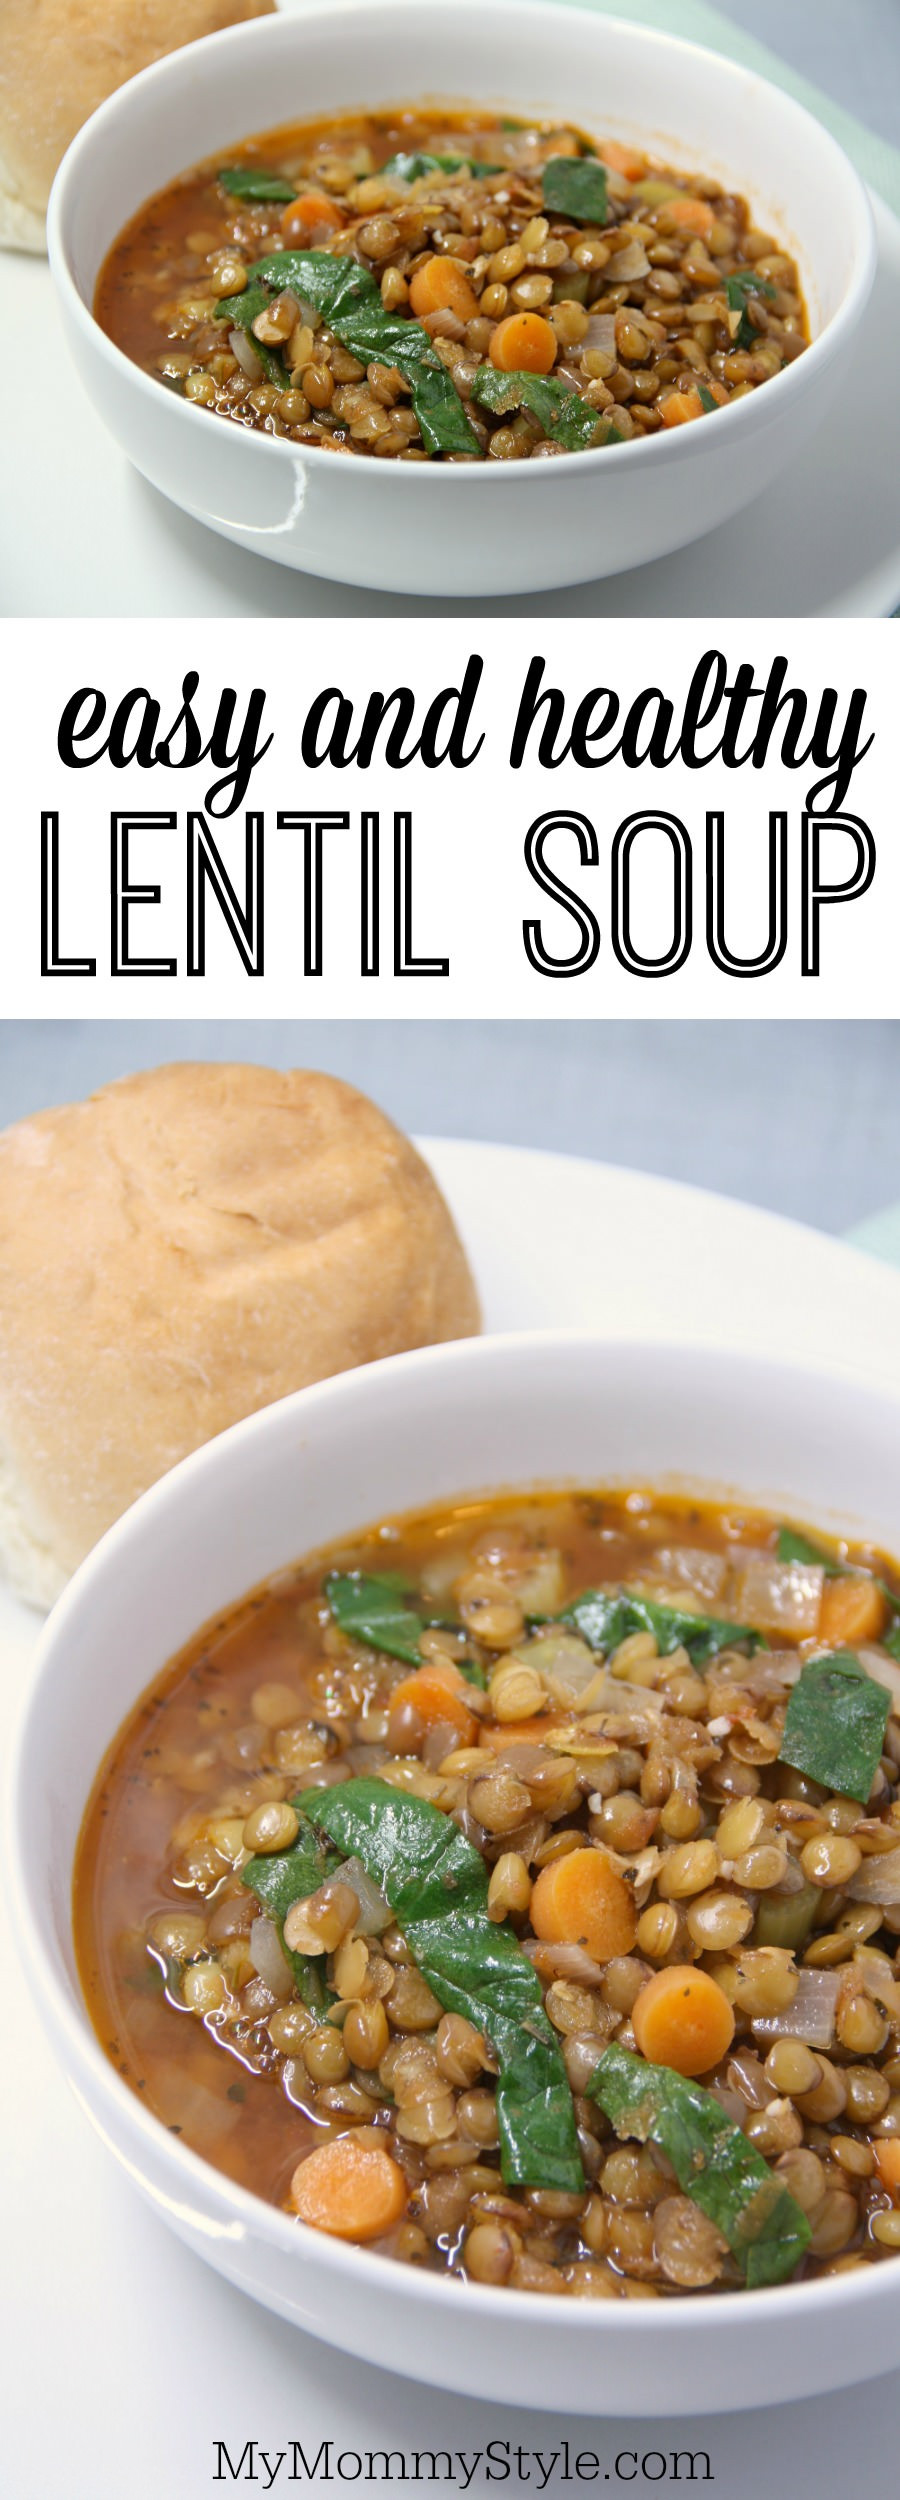 Easy And Healthy Vegetarian Recipes
 Easy and Healthy Lentil Soup My Mommy Style